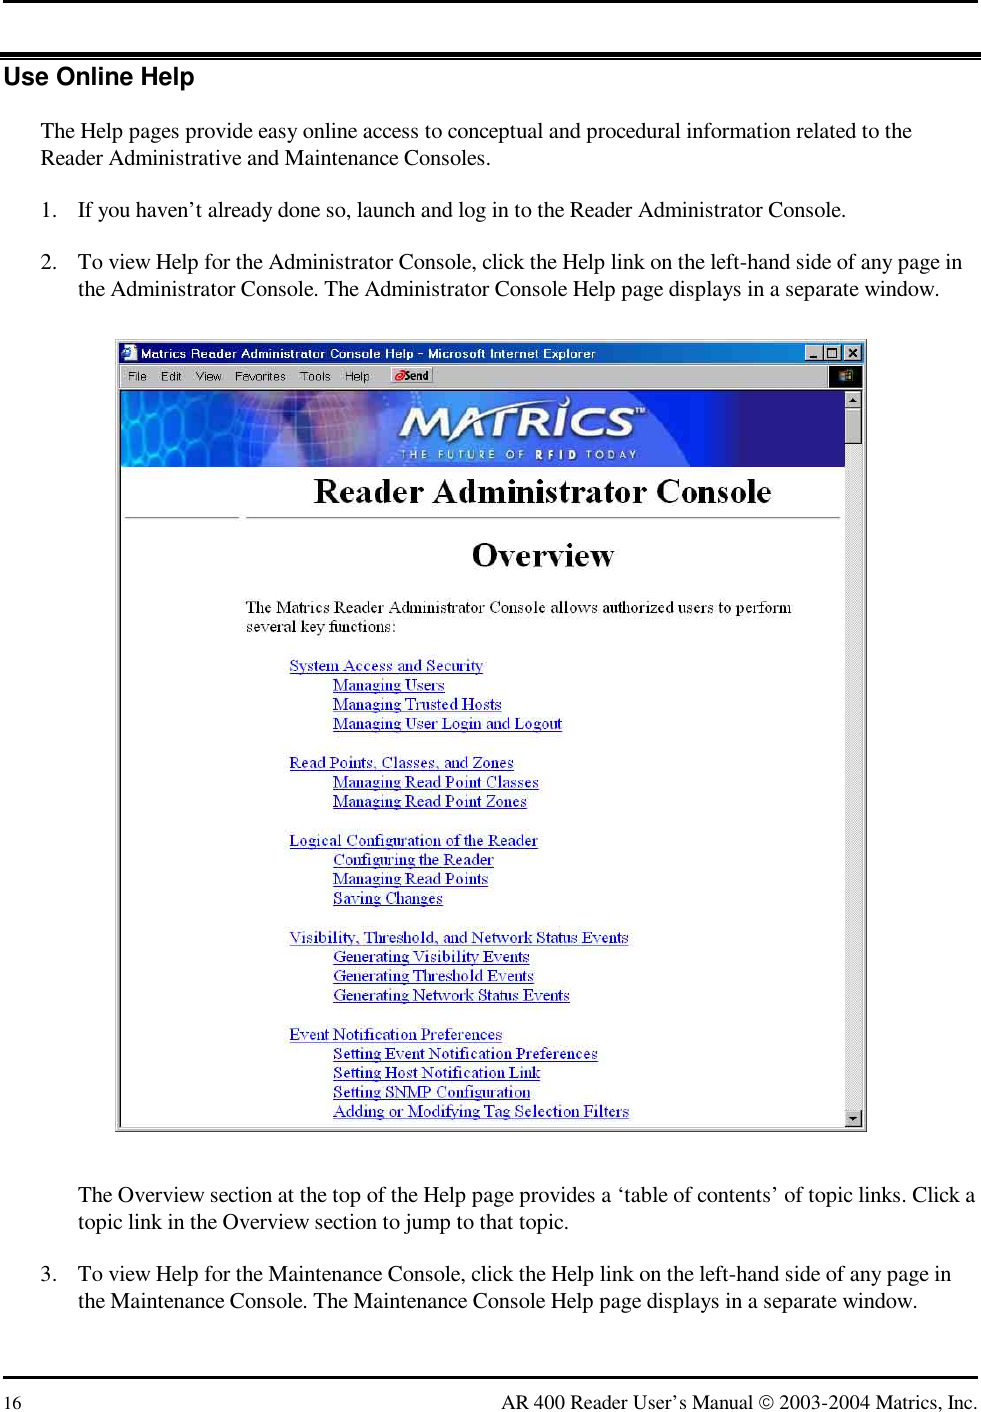  16  AR 400 Reader User’s Manual  2003-2004 Matrics, Inc. Use Online Help The Help pages provide easy online access to conceptual and procedural information related to the Reader Administrative and Maintenance Consoles. 1.  If you haven’t already done so, launch and log in to the Reader Administrator Console. 2.  To view Help for the Administrator Console, click the Help link on the left-hand side of any page in the Administrator Console. The Administrator Console Help page displays in a separate window.  The Overview section at the top of the Help page provides a ‘table of contents’ of topic links. Click a topic link in the Overview section to jump to that topic. 3.  To view Help for the Maintenance Console, click the Help link on the left-hand side of any page in the Maintenance Console. The Maintenance Console Help page displays in a separate window. 